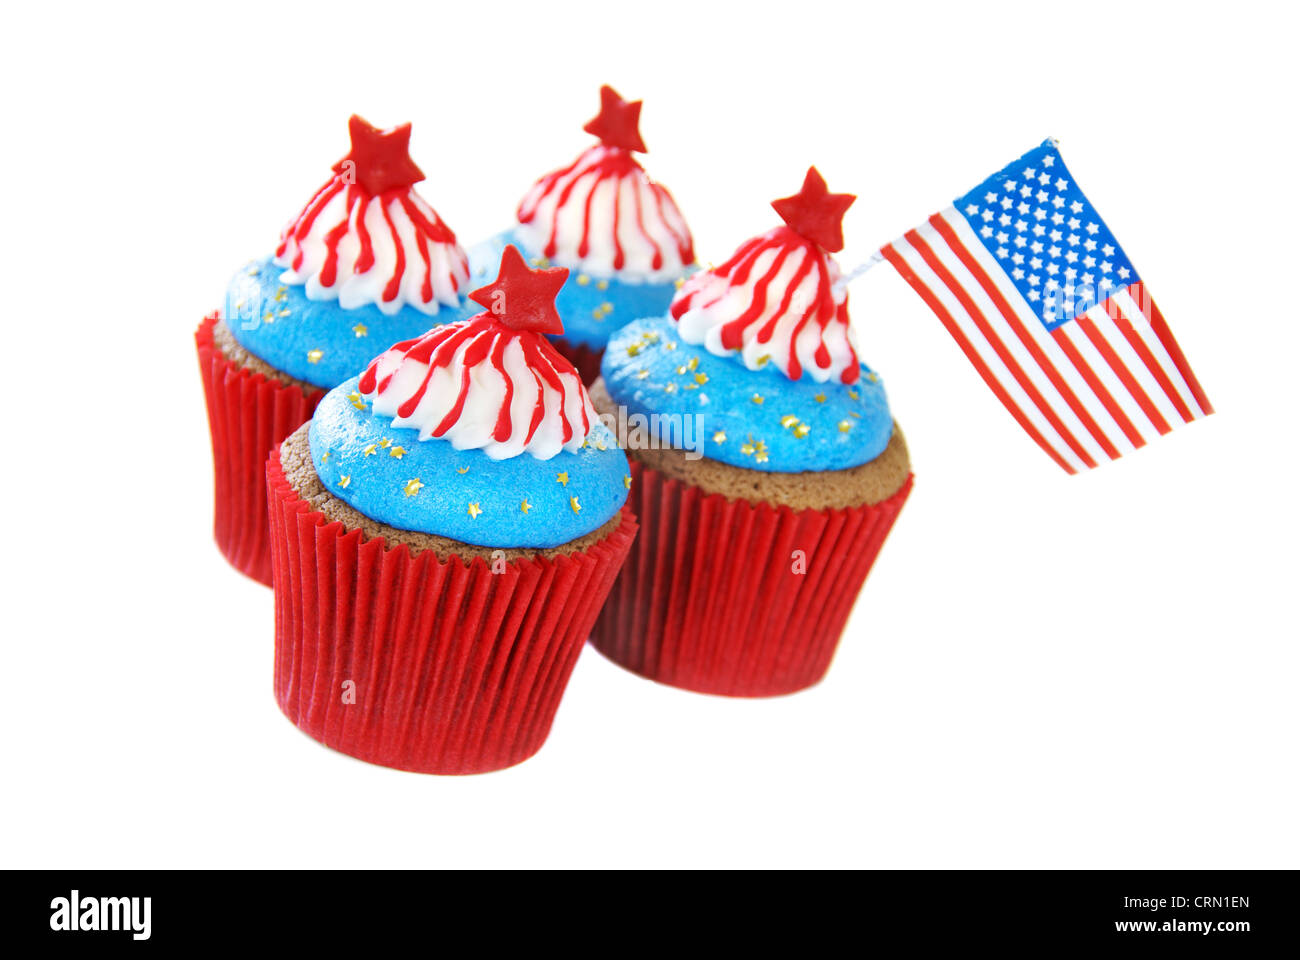 Cupcakes with American patriotic theme for 4th of July celebration and other events in America. Stock Photo